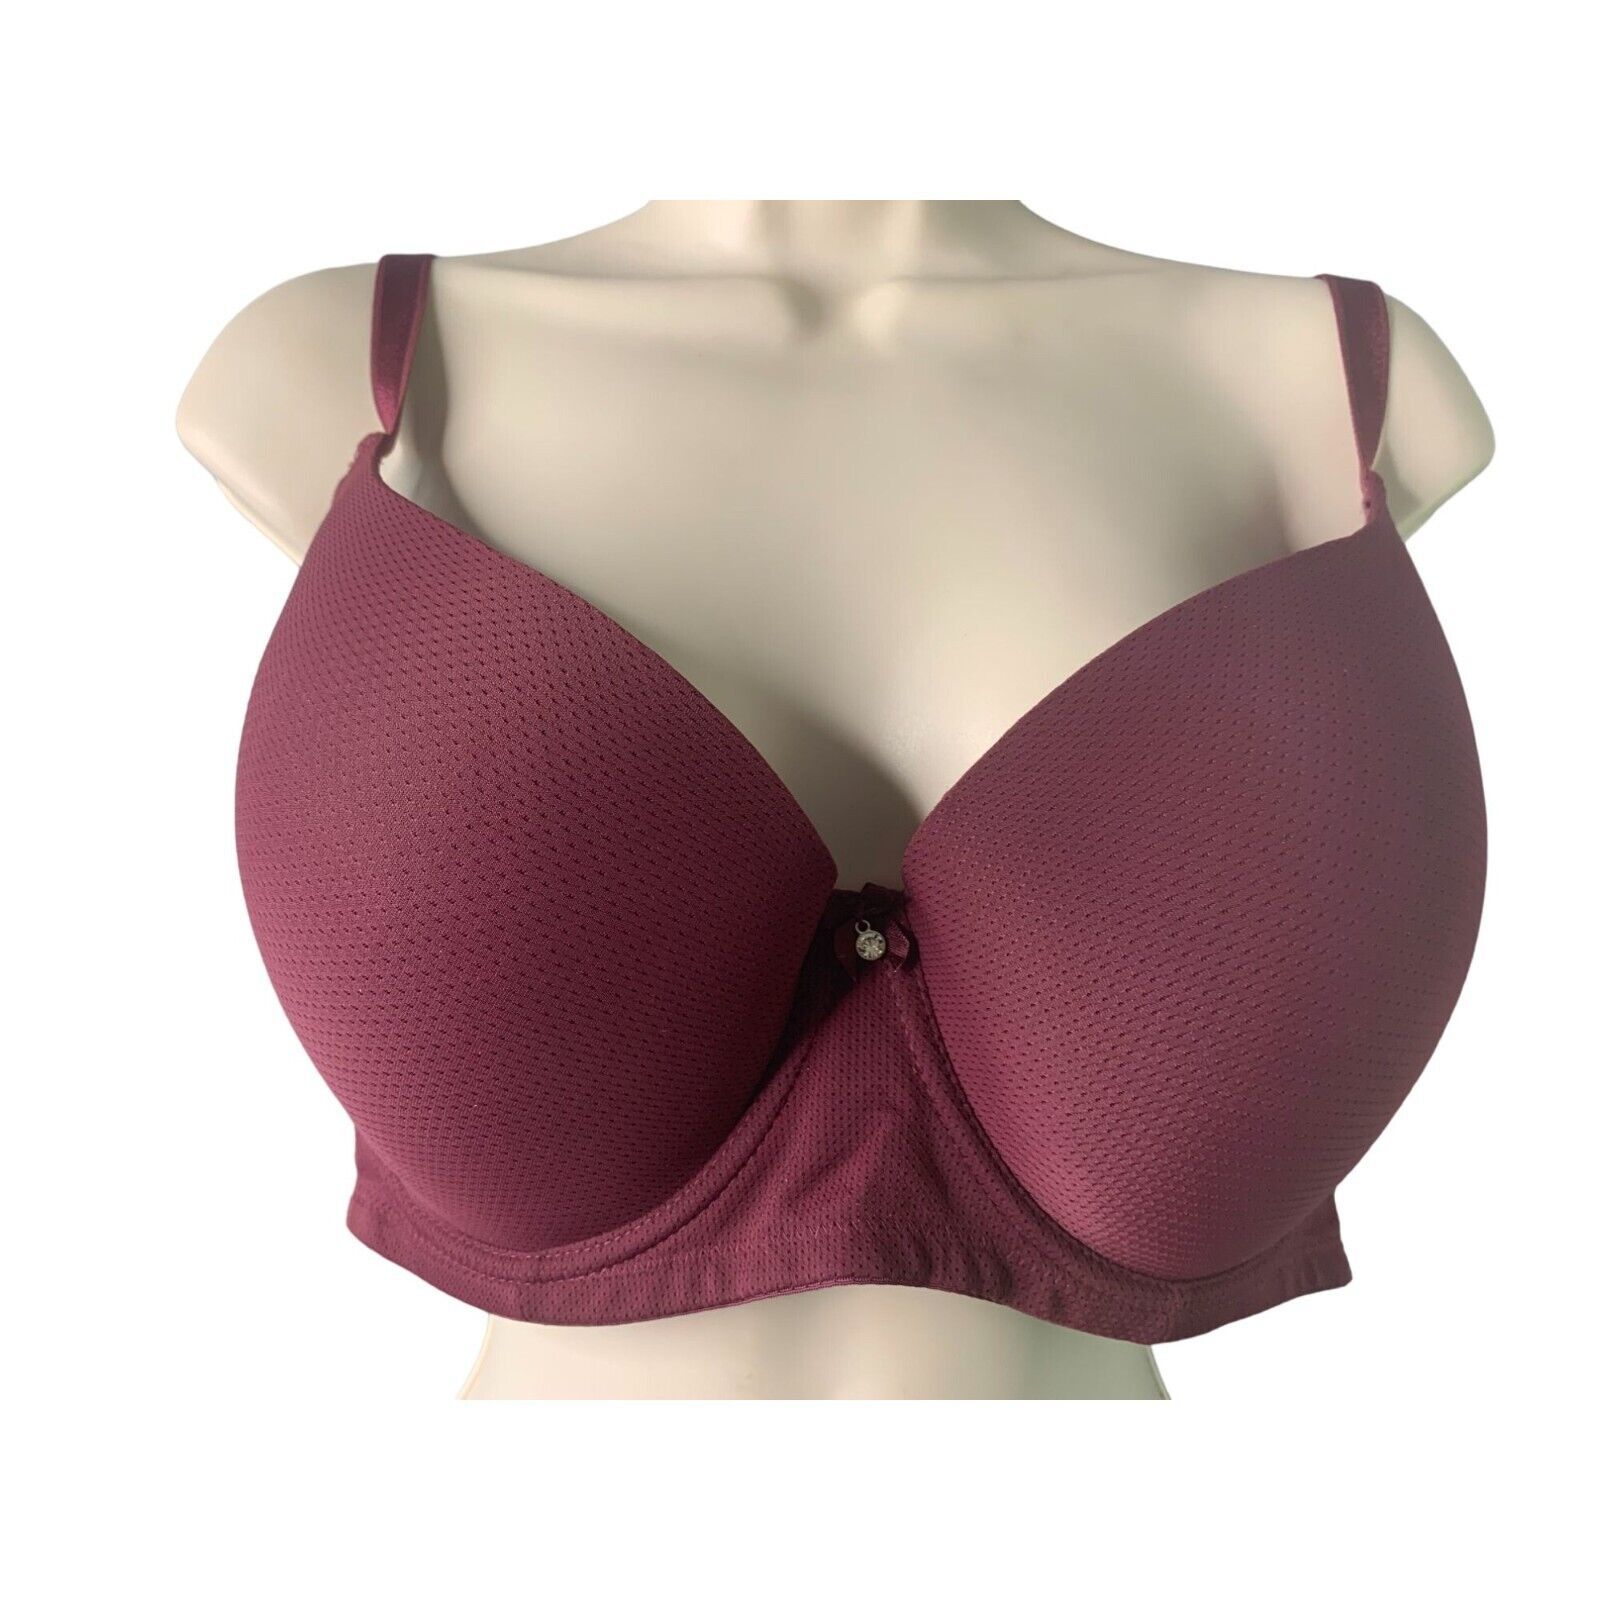 Primary image for Womens Size 40D 105E Bra Padded Burgundy Wine Color Underwire